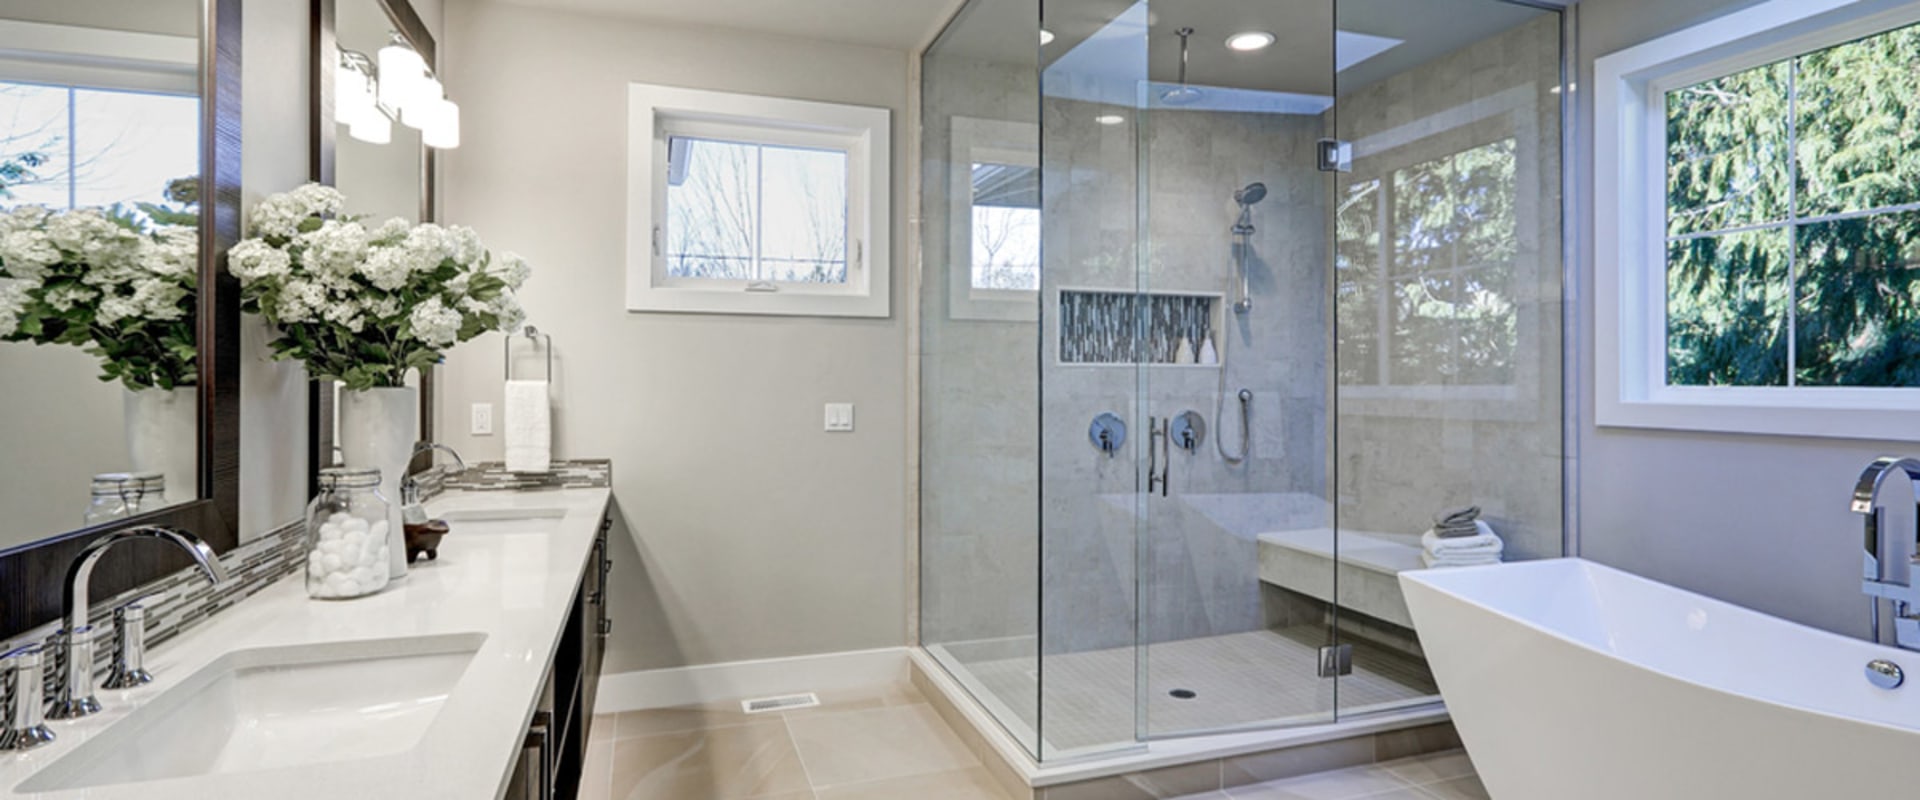 How Much Does it Cost to Install a Glass Shower Door?